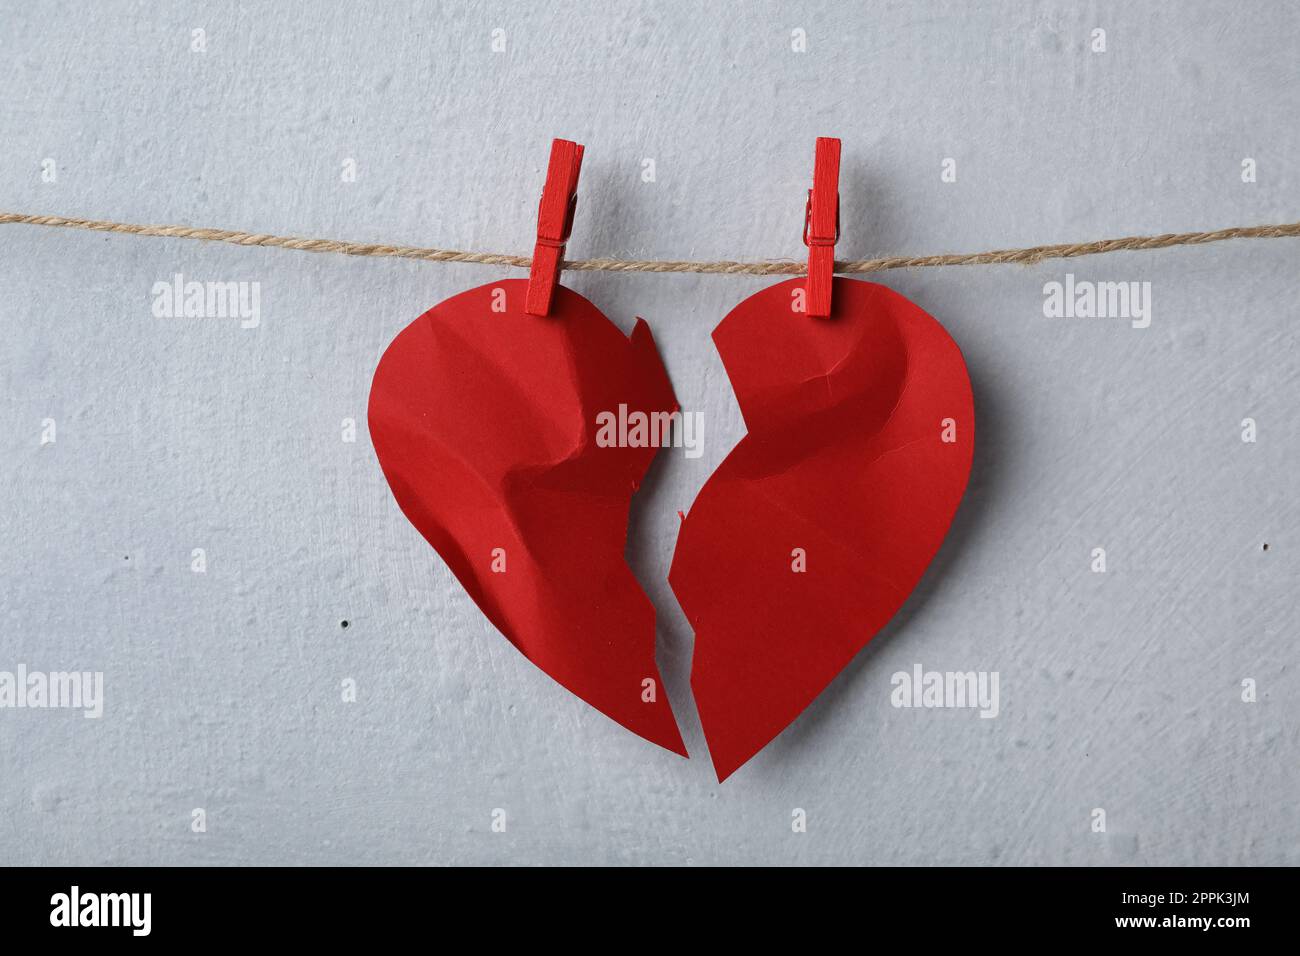 Halves of torn paper heart pinned on laundry string near light wall. Relationship problems concept Stock Photo